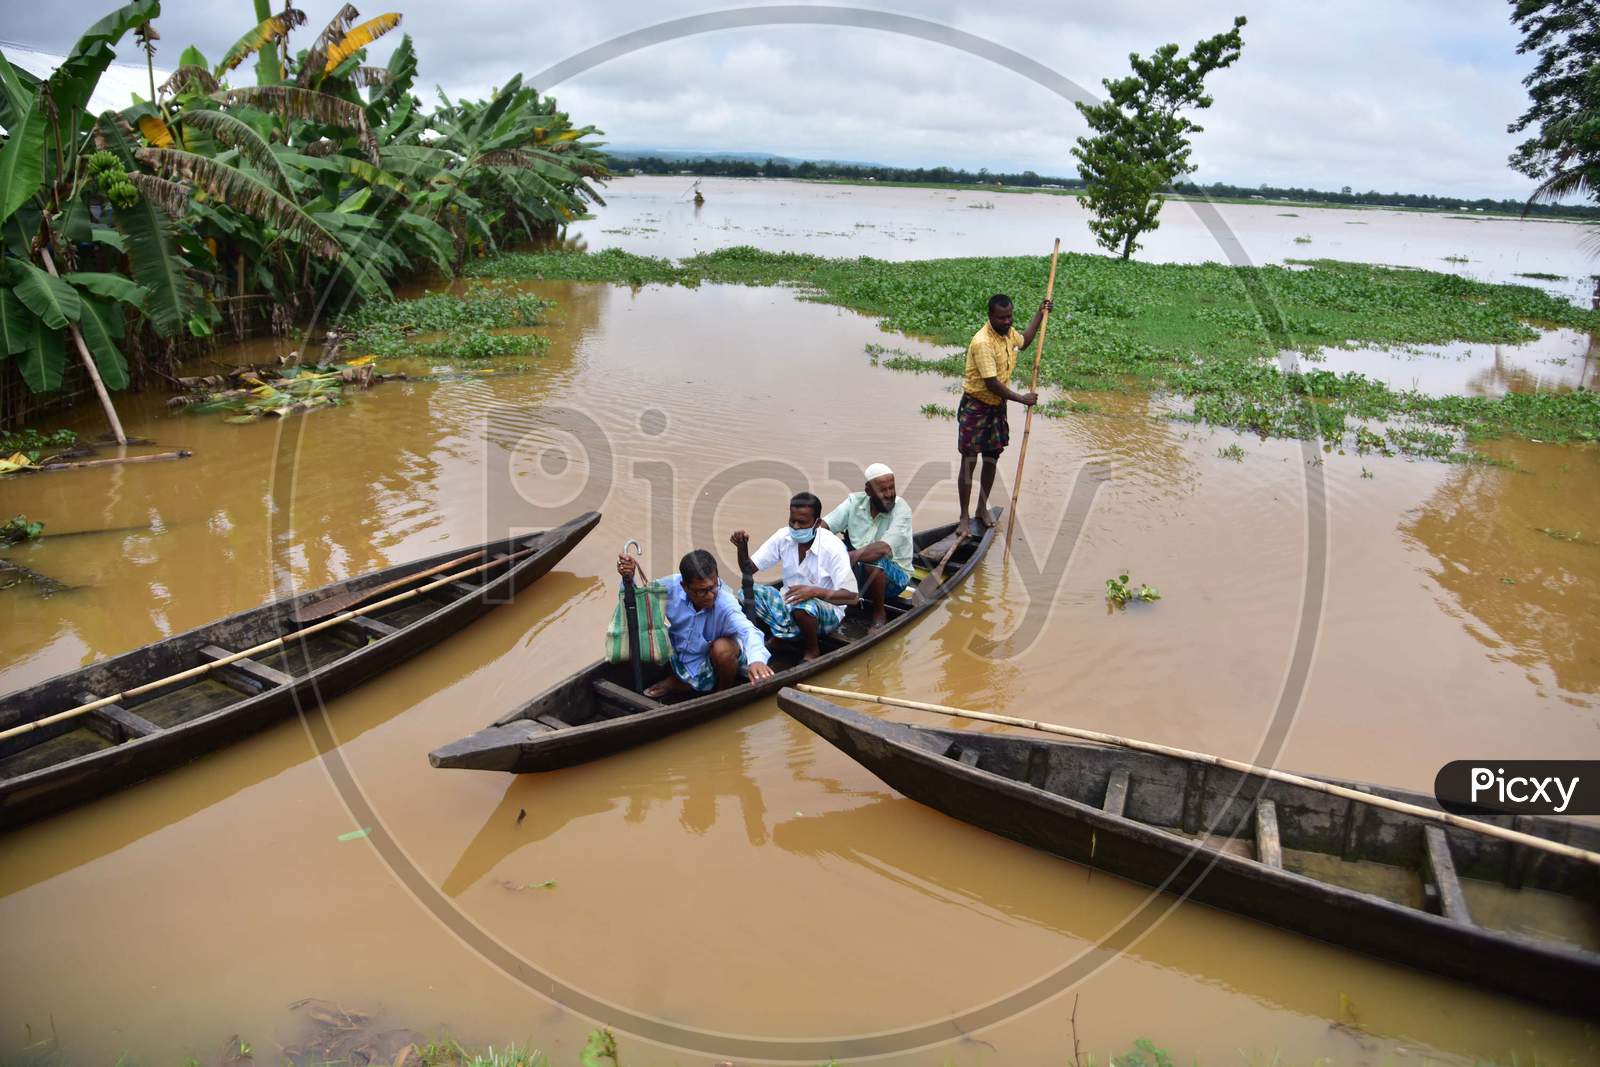 Villagers use a boat to reach to a safer place in a flood-affected village in Nagaon, Assam on July 22, 2020